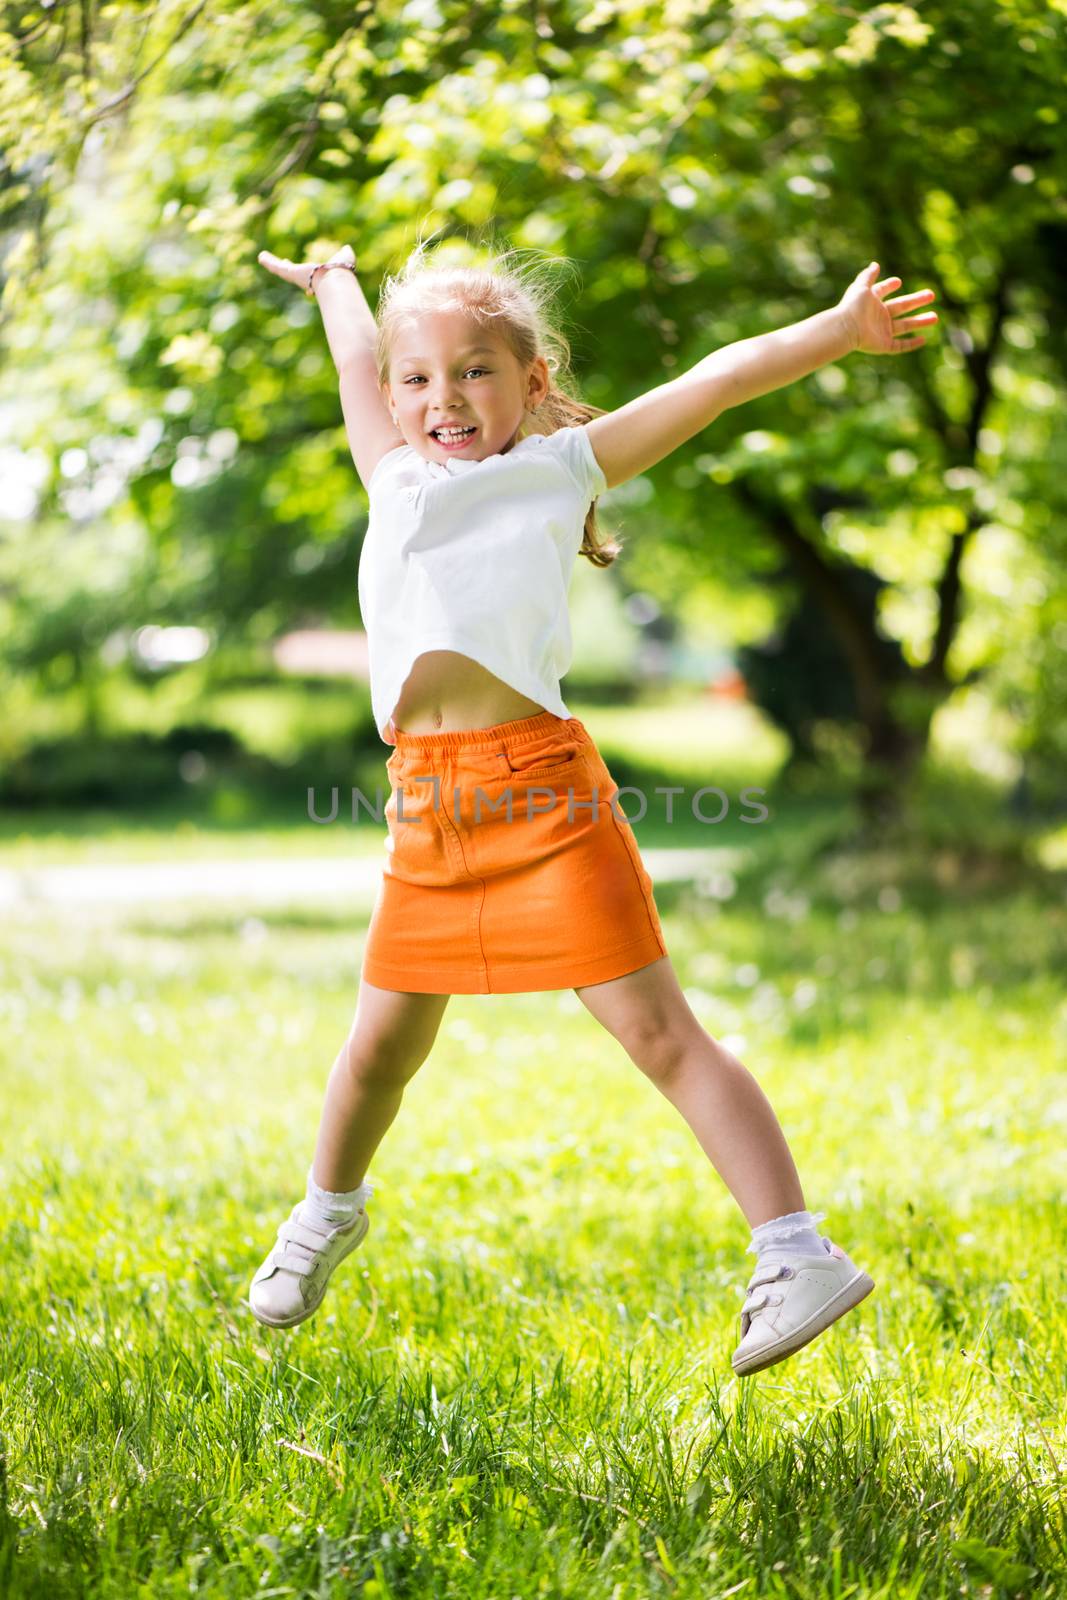 Cute Little Girl Jumping in The Park and having fun.